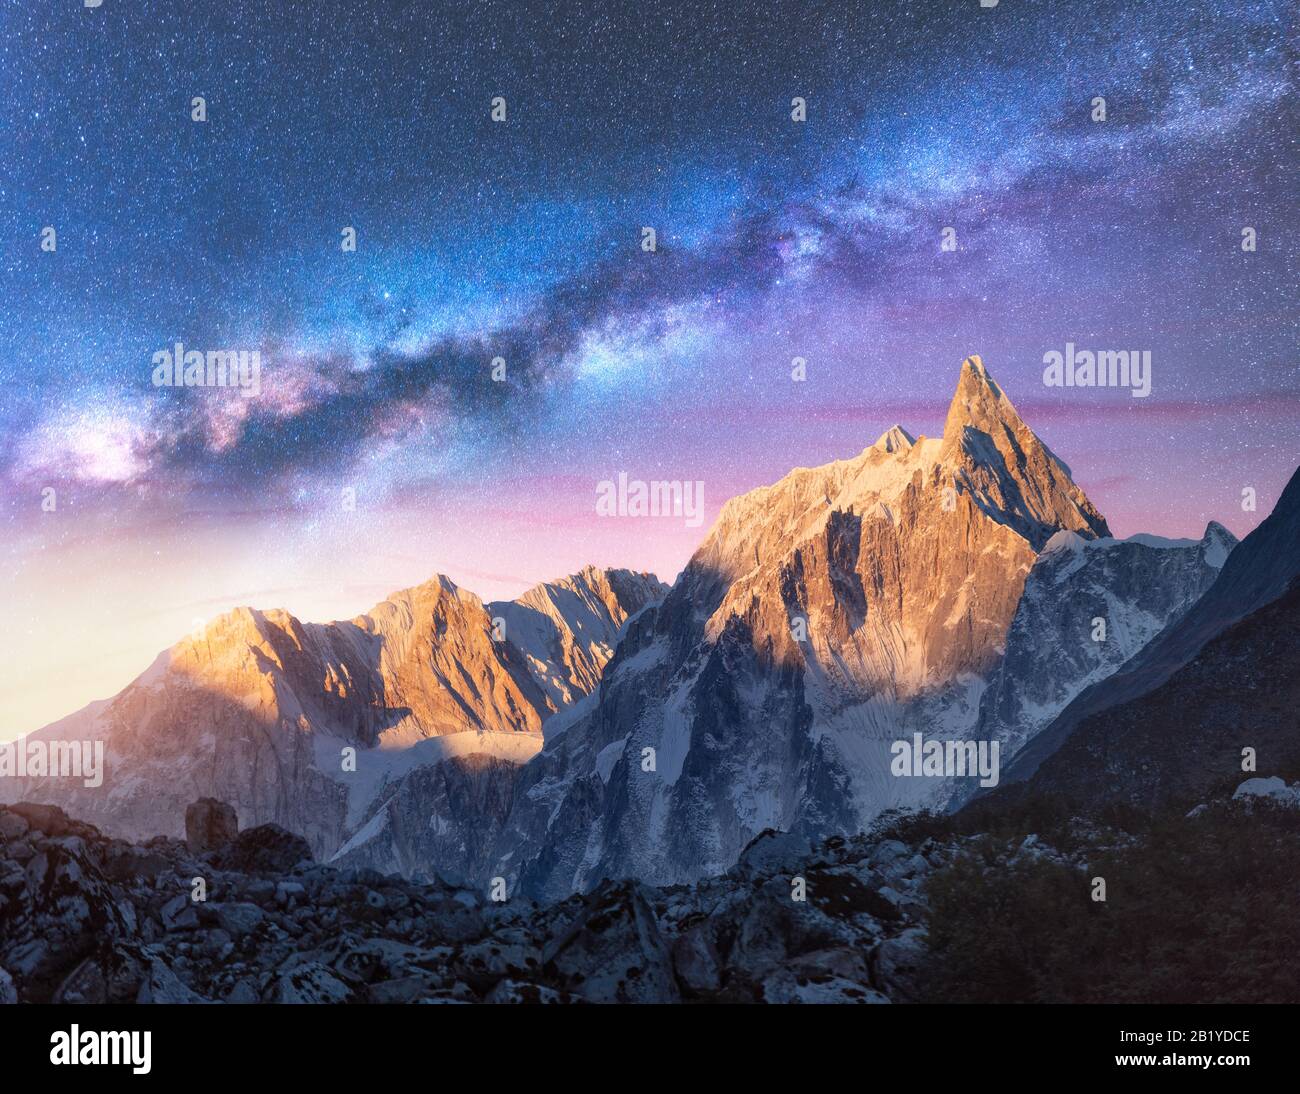 Milky Way over beautiful mountains at night. Sace landscape Stock Photo